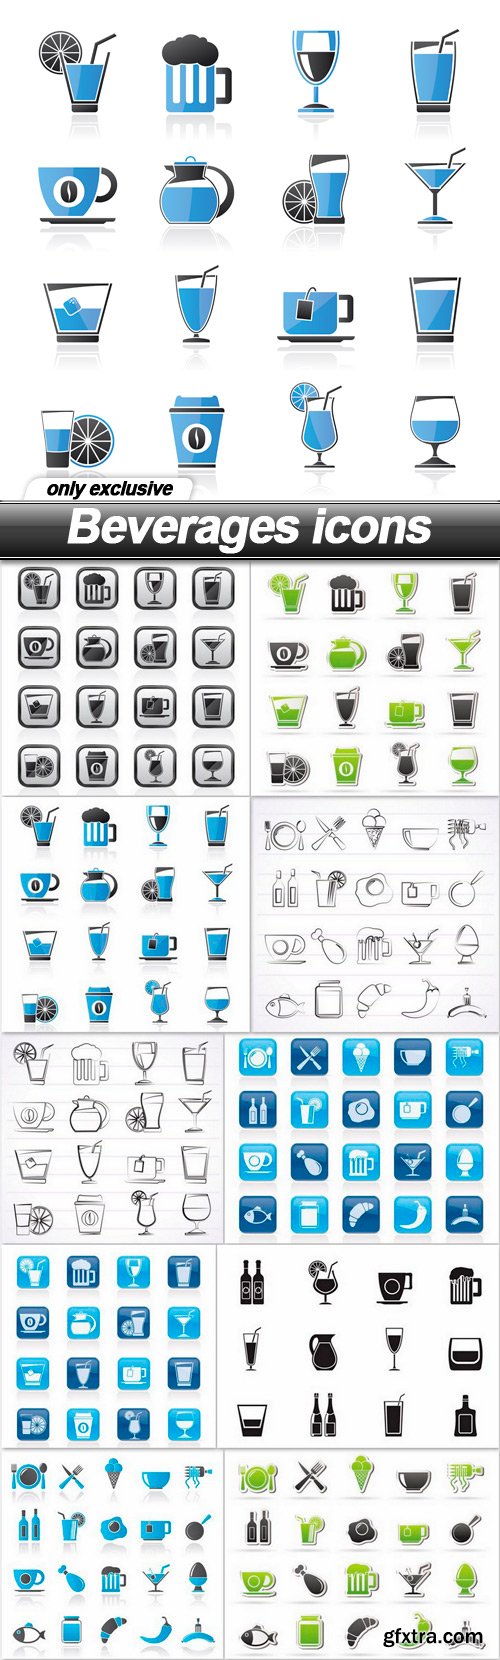 Beverages icons - 10 EPS